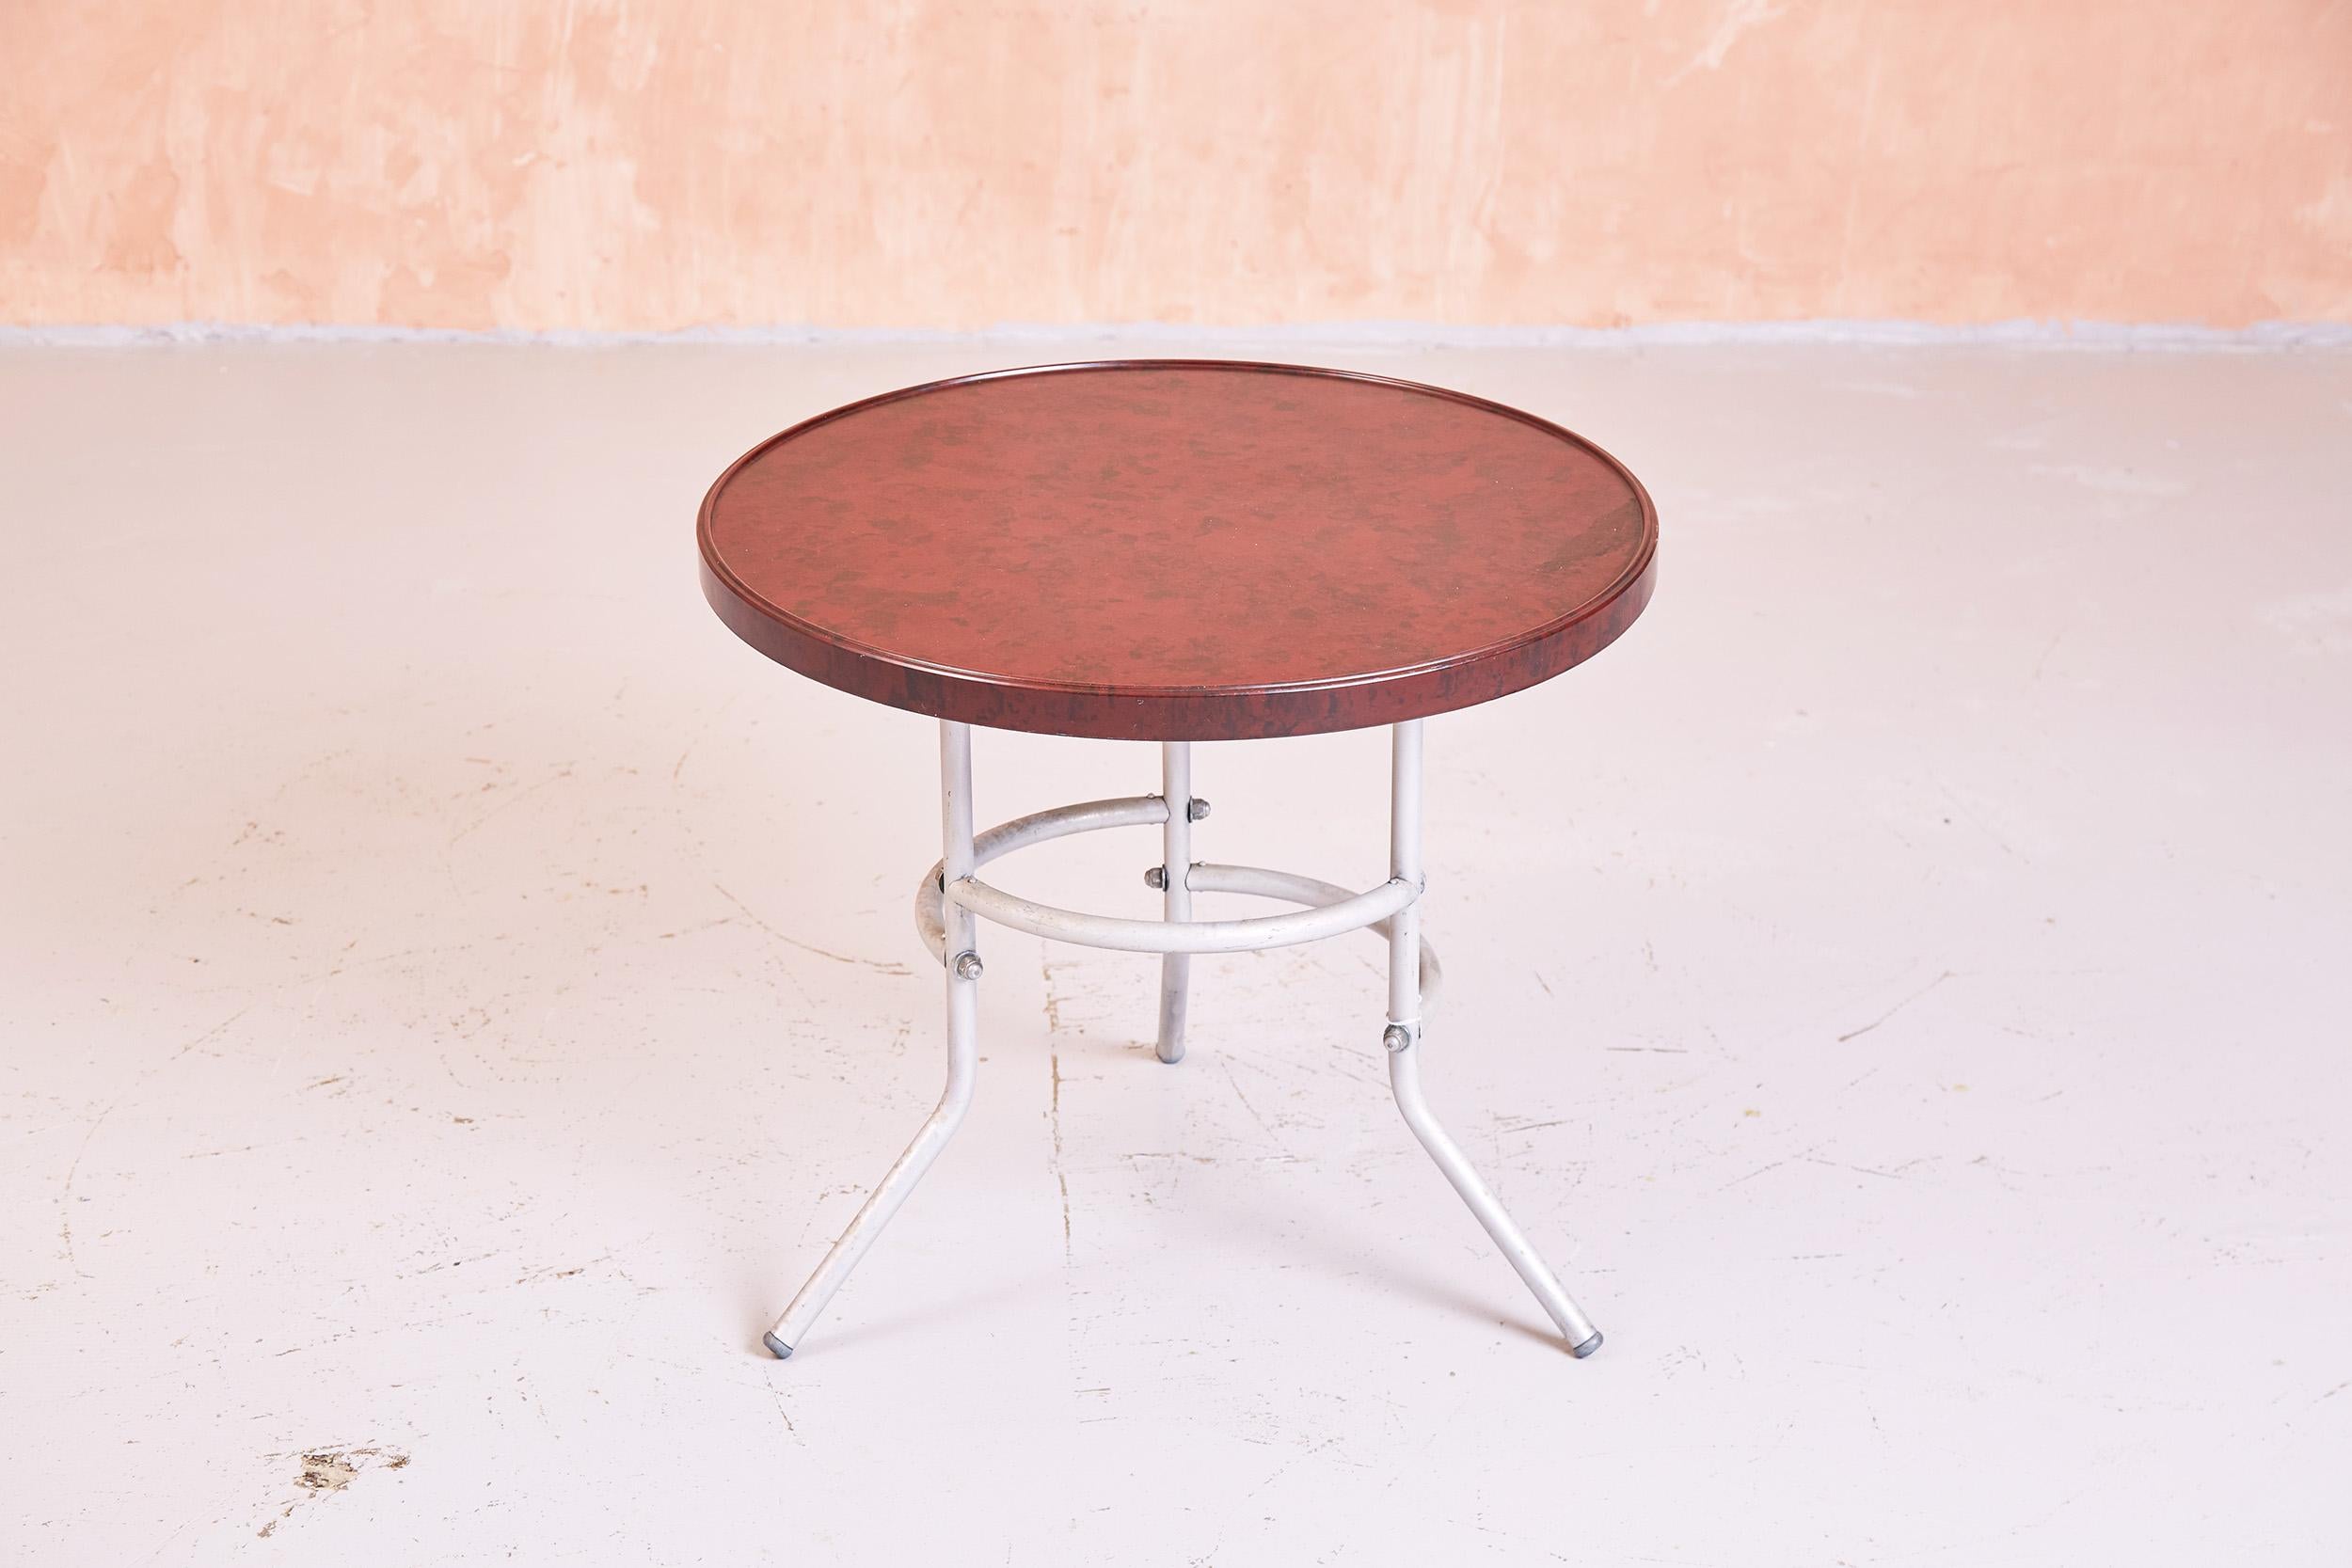 British bakelite topped side table with chrome steel base.
Produced in the 1940s, this modernist design was manufactured by Mahbro
 